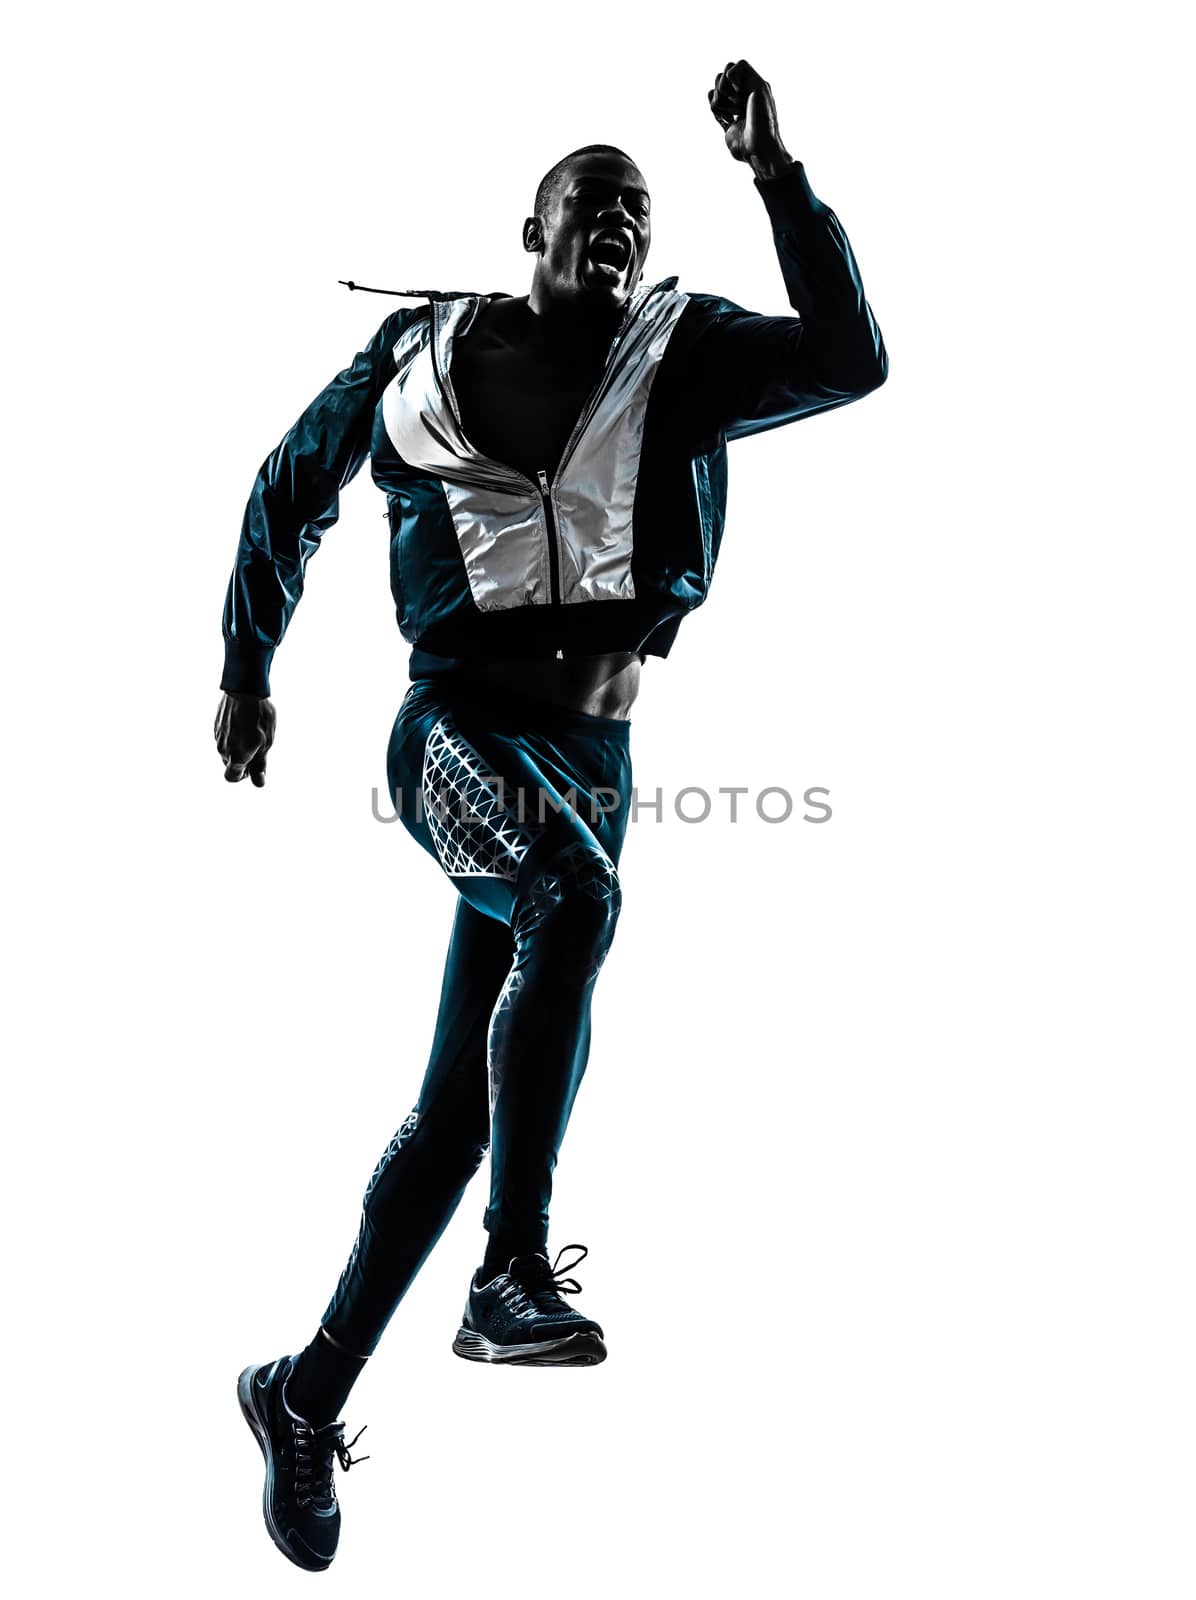 one african man running sprinting jogging in silhouette studio isolated on white background